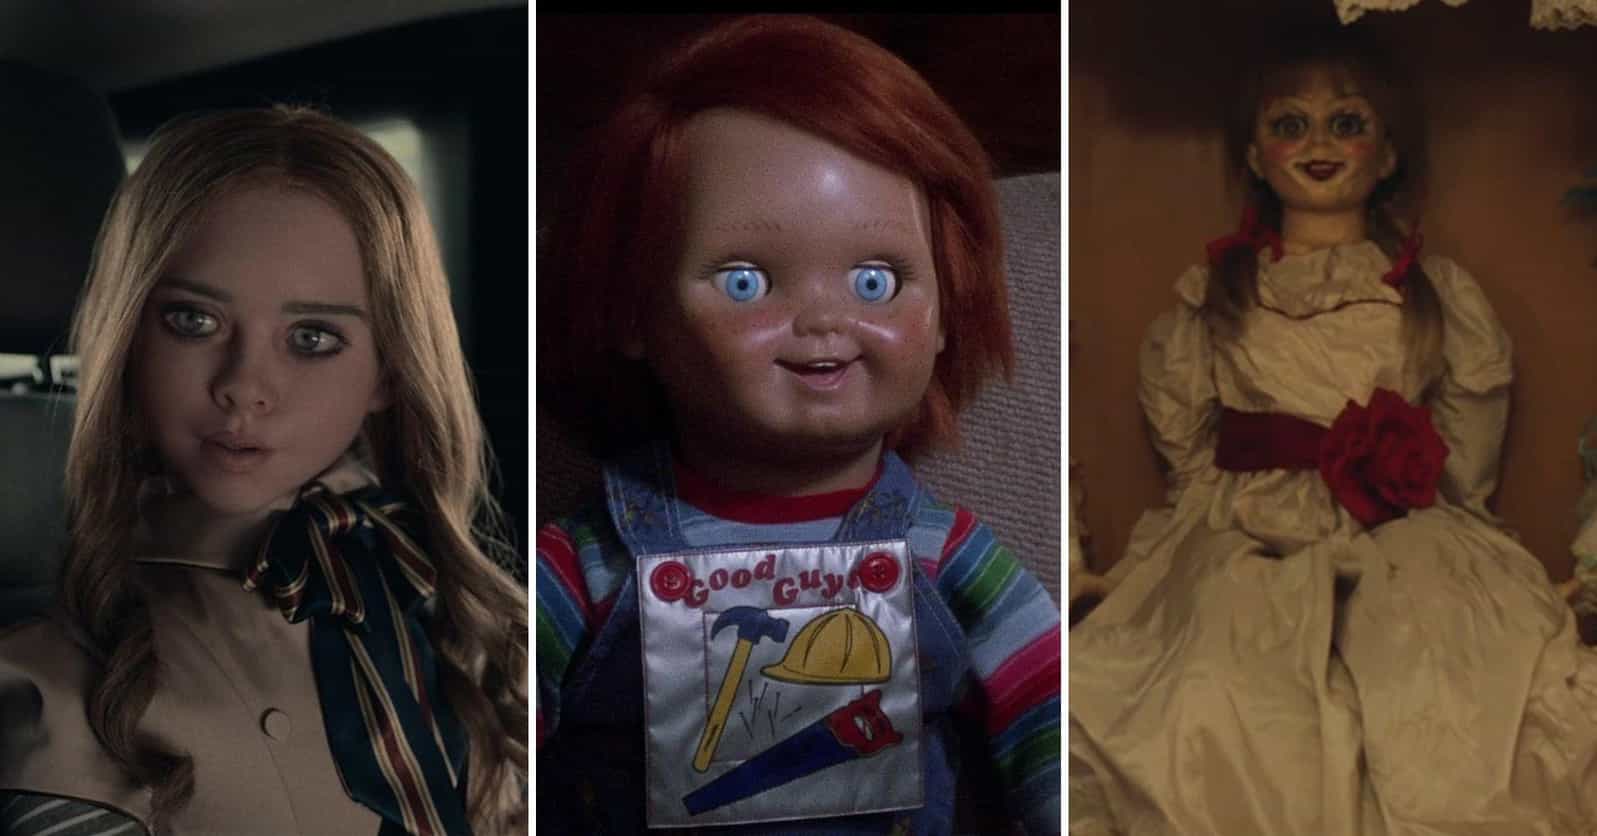 The 15 Best Horror Movies Where Dolls Come To Life, Ranked By How Much They Freak Us Out